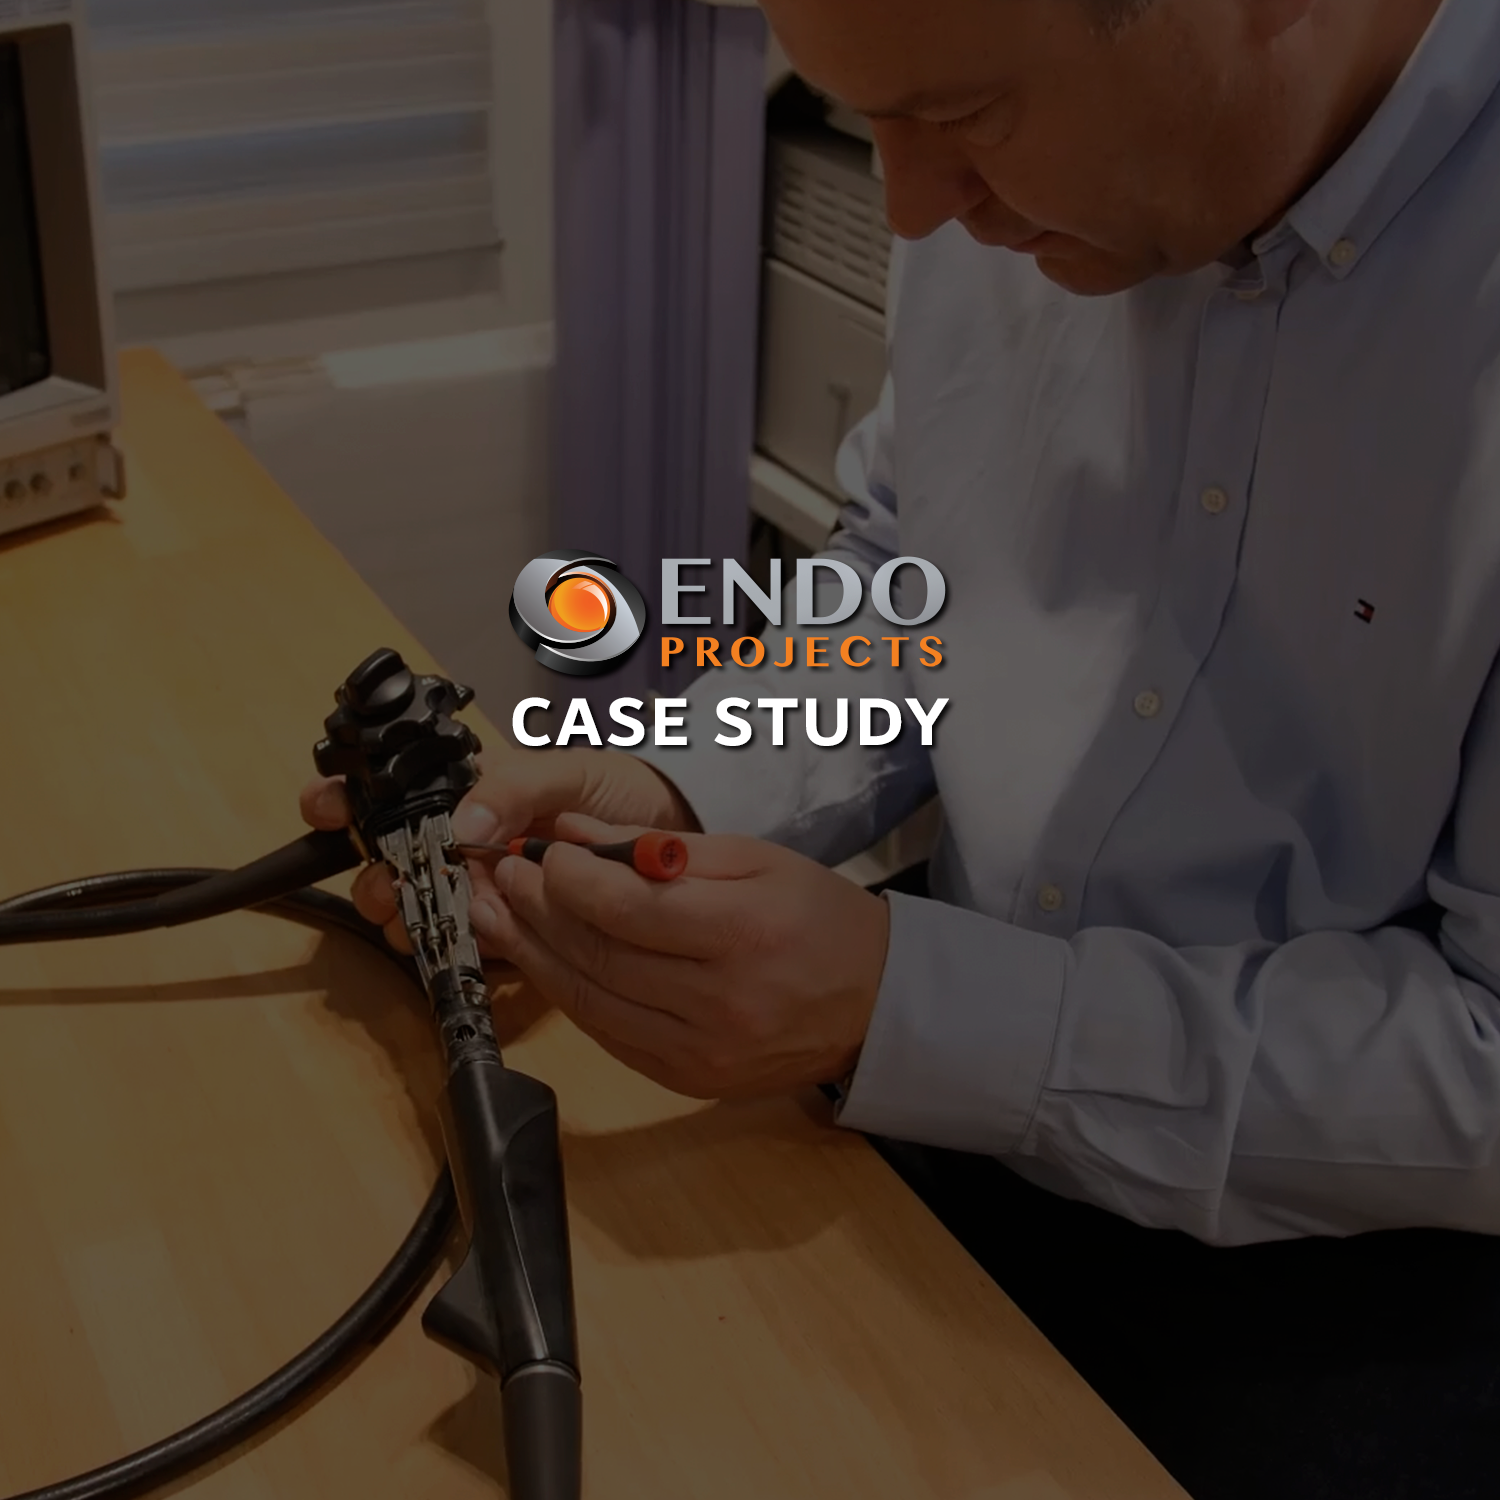 Endo Projects case study